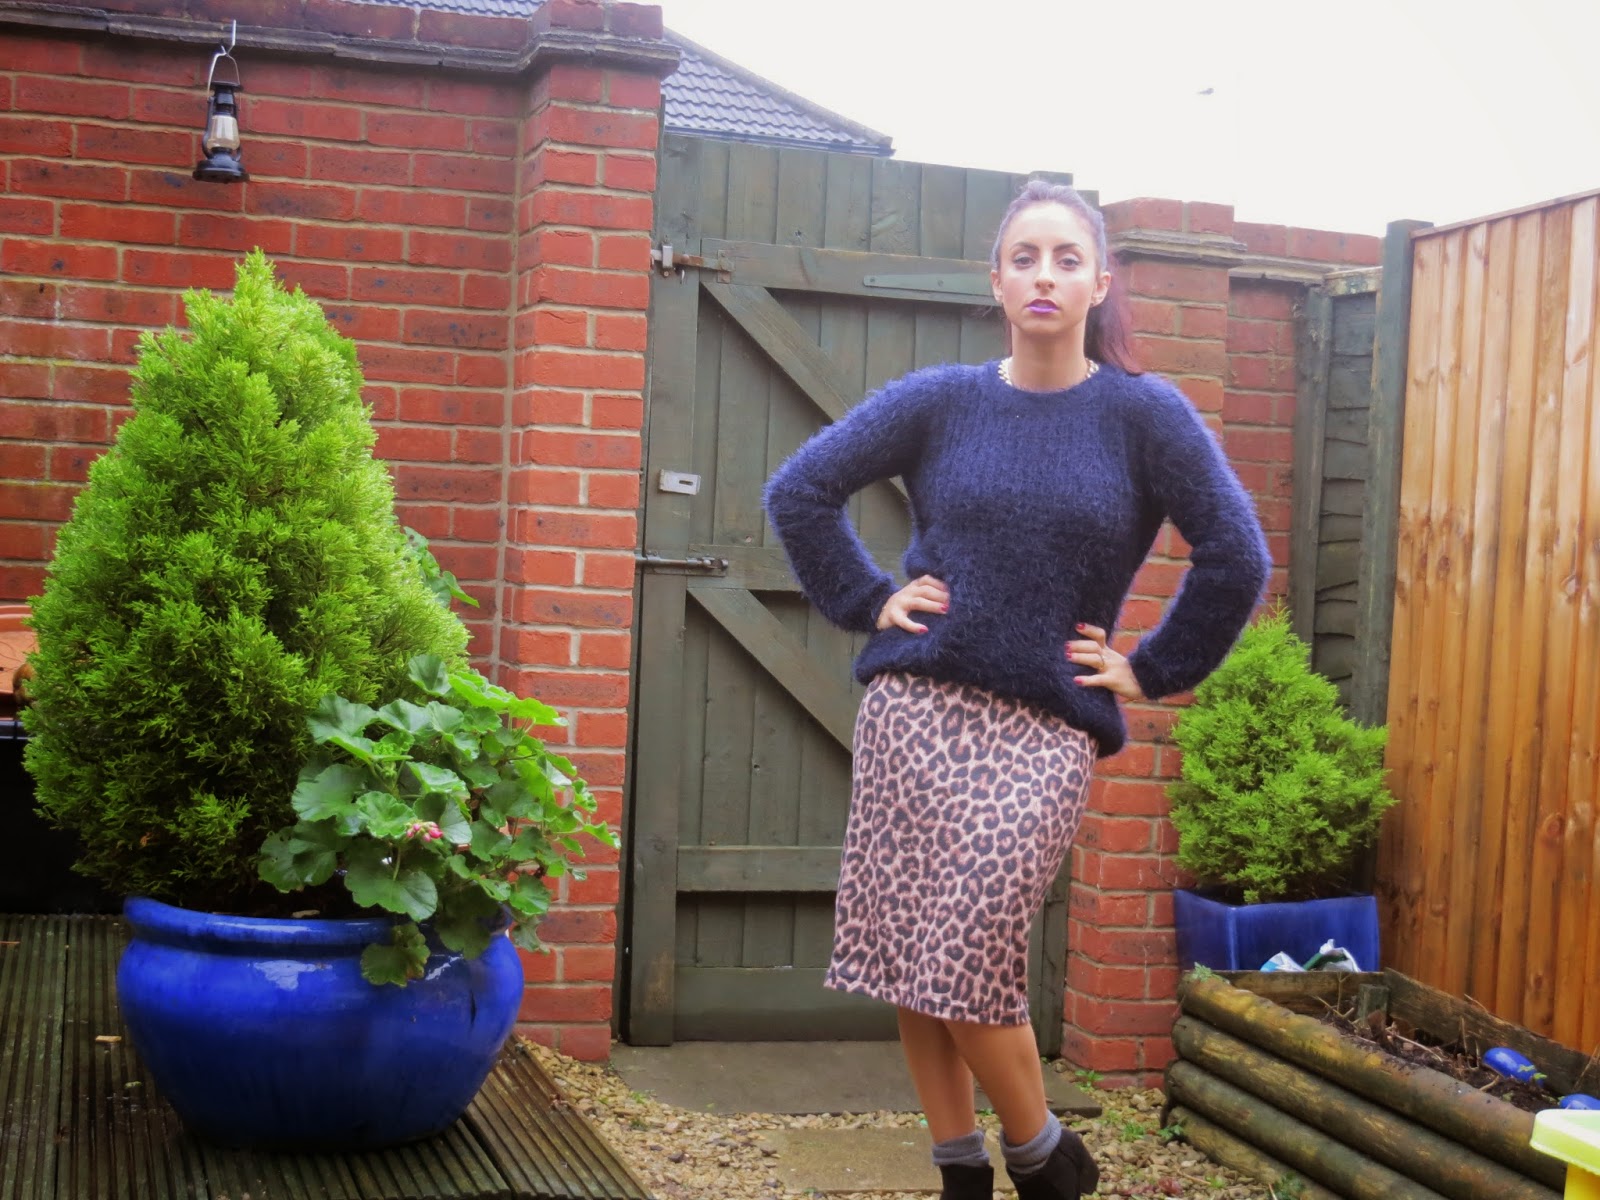 OOTD, Winter fashion, fashion outfit inspiration, fashion inspiration, leopard print, new look, miss selfridge, outfit ideas,